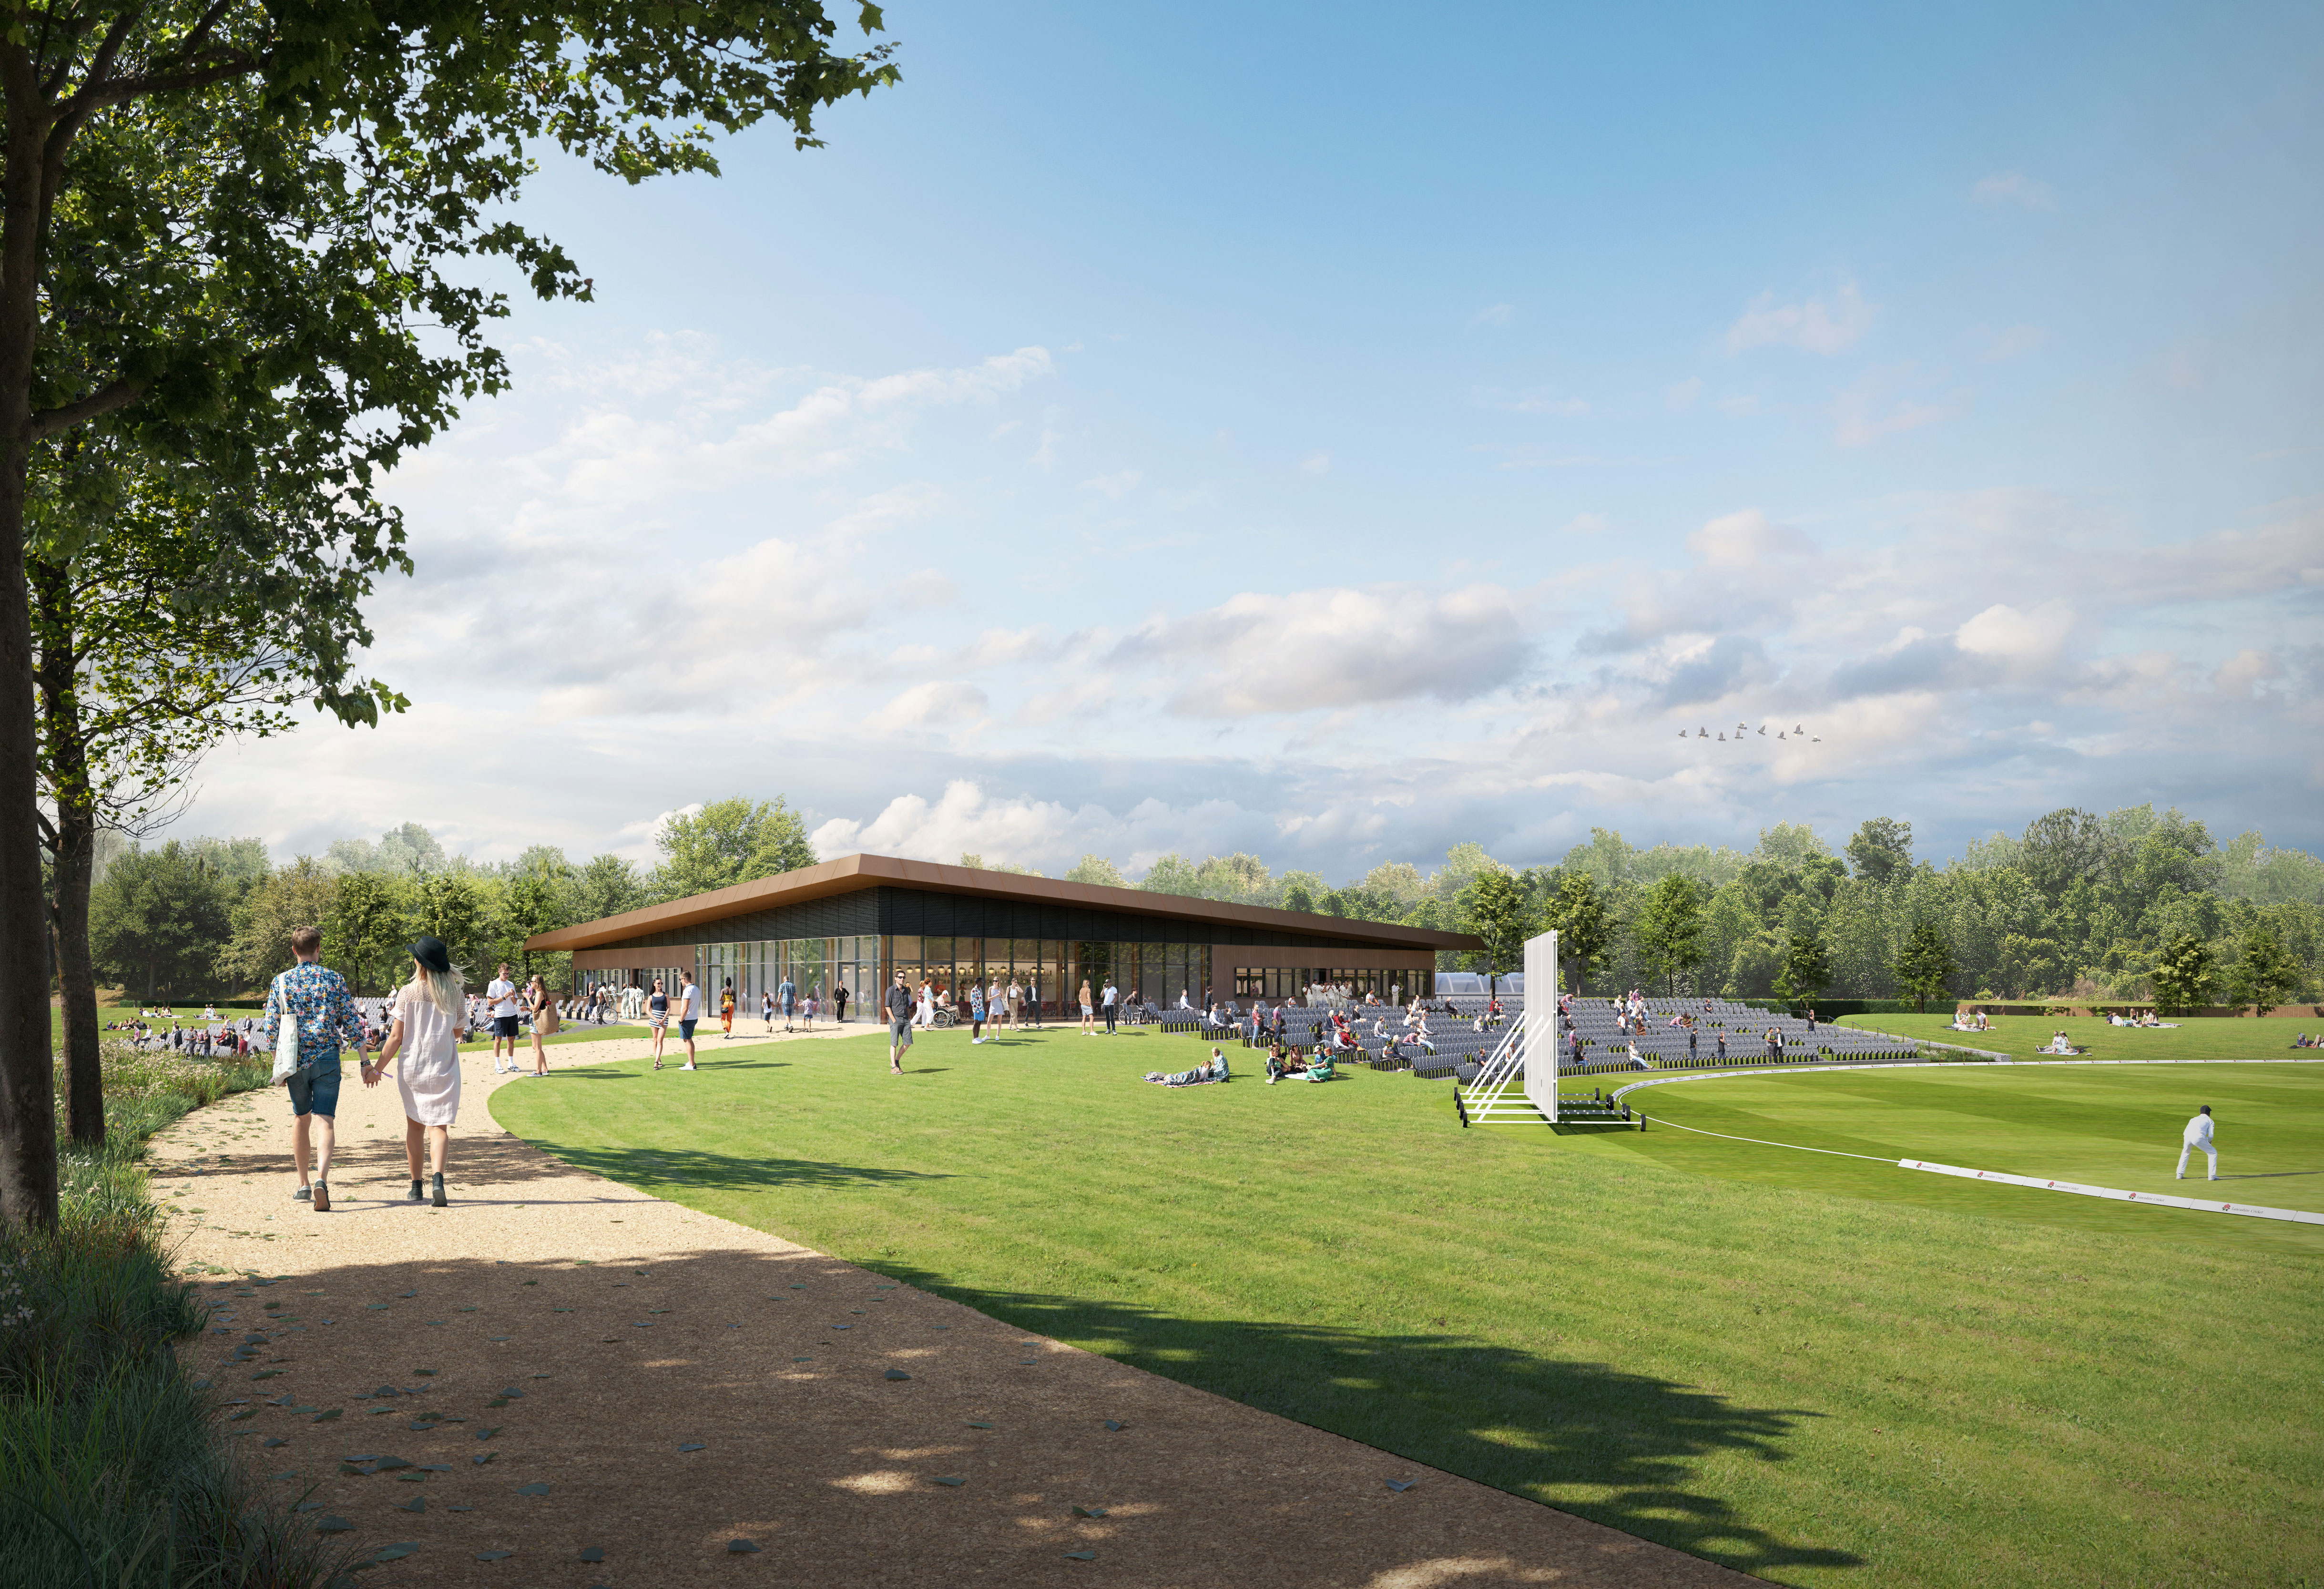 BDP’s Community Cricket Centre in Lancashire Awarded Planning Approval